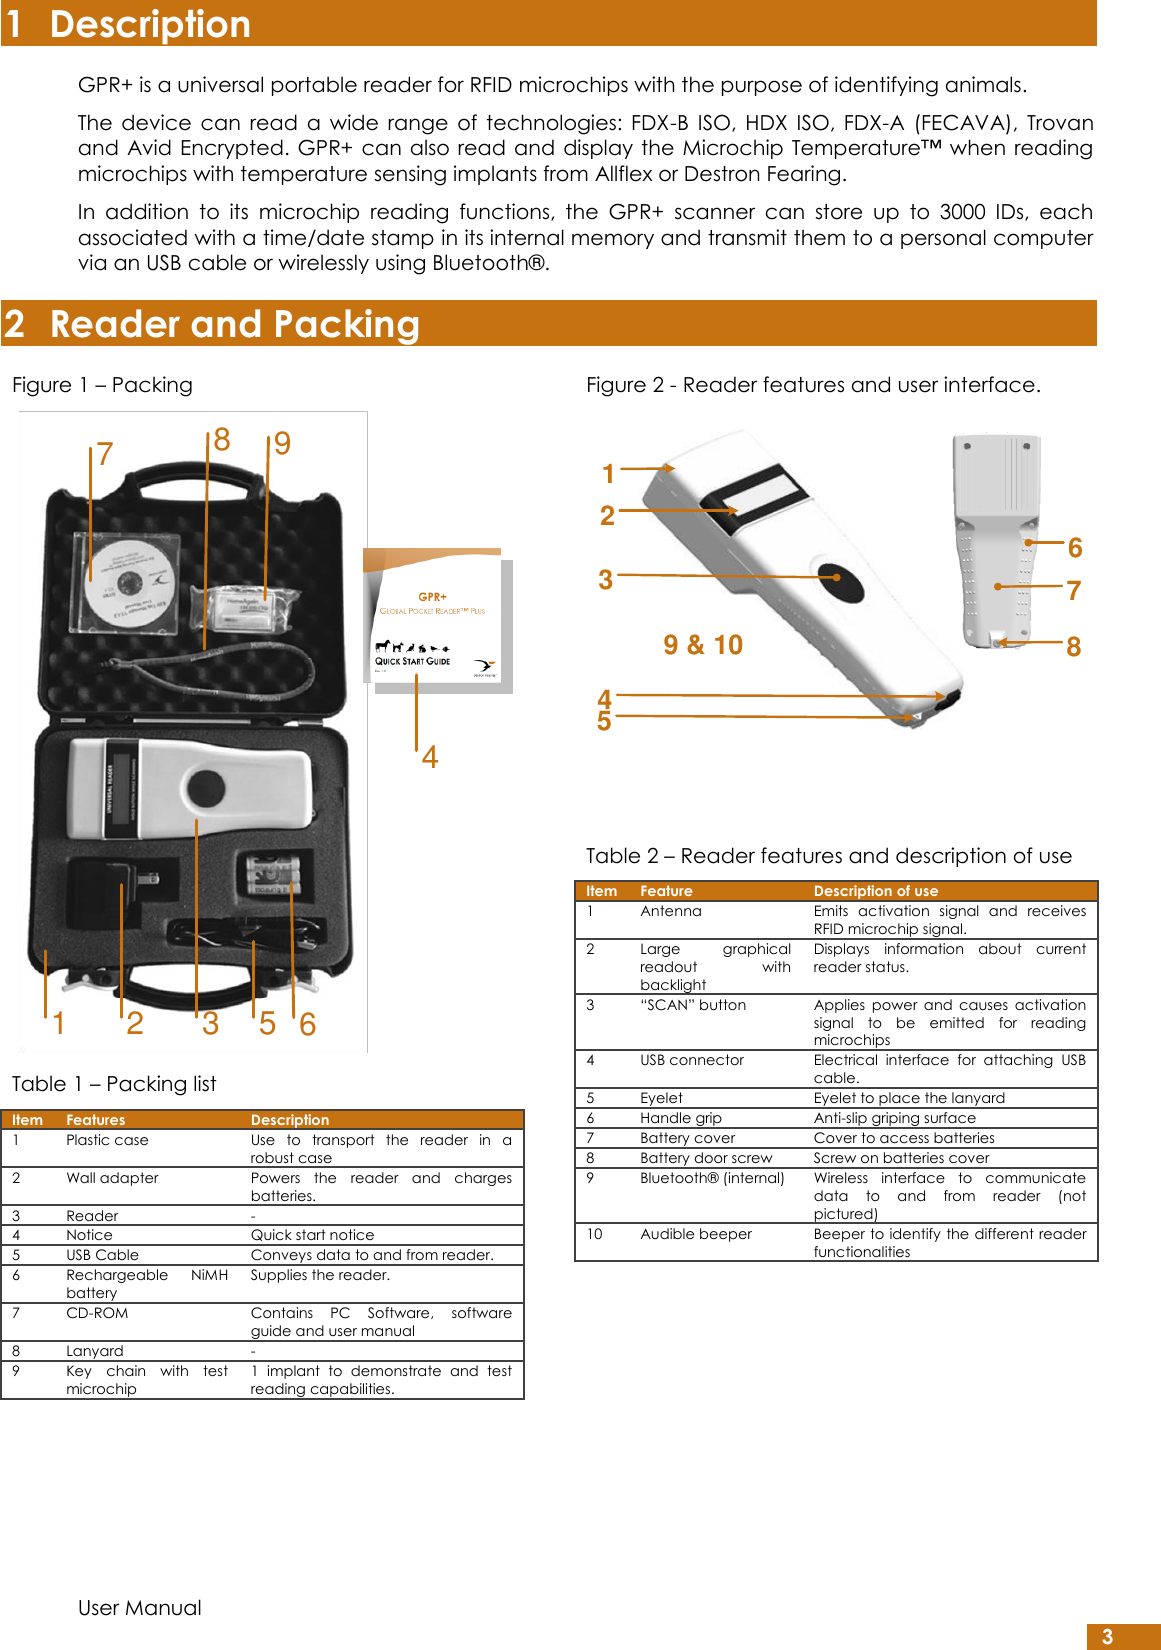  User Manual 3 1 Description GPR+ is a universal portable reader for RFID microchips with the purpose of identifying animals.  The  device  can  read  a  wide  range  of  technologies:  FDX-B  ISO,  HDX  ISO,  FDX-A  (FECAVA),  Trovan and  Avid Encrypted. GPR+ can also  read  and display the  Microchip Temperature™ when reading microchips with temperature sensing implants from Allflex or Destron Fearing.  In  addition  to  its  microchip  reading  functions,  the  GPR+  scanner  can  store  up  to  3000  IDs,  each associated with a time/date stamp in its internal memory and transmit them to a personal computer via an USB cable or wirelessly using Bluetooth®. 2 Reader and Packing Figure 1 – Packing  Table 1 – Packing list Item Features Description 1 Plastic case Use  to  transport  the  reader  in  a robust case 2 Wall adapter Powers  the  reader  and  charges batteries. 3 Reader - 4 Notice Quick start notice 5 USB Cable Conveys data to and from reader. 6 Rechargeable  NiMH battery Supplies the reader. 7 CD-ROM Contains  PC  Software,  software guide and user manual 8 Lanyard - 9 Key  chain  with  test microchip 1  implant  to  demonstrate  and  test reading capabilities.  Figure 2 - Reader features and user interface.    Table 2 – Reader features and description of use Item Feature Description of use 1 Antenna Emits  activation  signal  and  receives RFID microchip signal. 2 Large  graphical readout  with backlight Displays  information  about  current reader status. 3 “SCAN” button Applies  power  and  causes  activation signal  to  be  emitted  for  reading microchips 4 USB connector Electrical  interface  for  attaching  USB cable. 5 Eyelet Eyelet to place the lanyard 6 Handle grip Anti-slip griping surface 7 Battery cover Cover to access batteries 8 Battery door screw Screw on batteries cover 9 Bluetooth® (internal) Wireless  interface  to  communicate data  to  and  from  reader  (not pictured) 10 Audible beeper Beeper to identify the different reader functionalities     7892 51 3 64123548769 &amp; 10